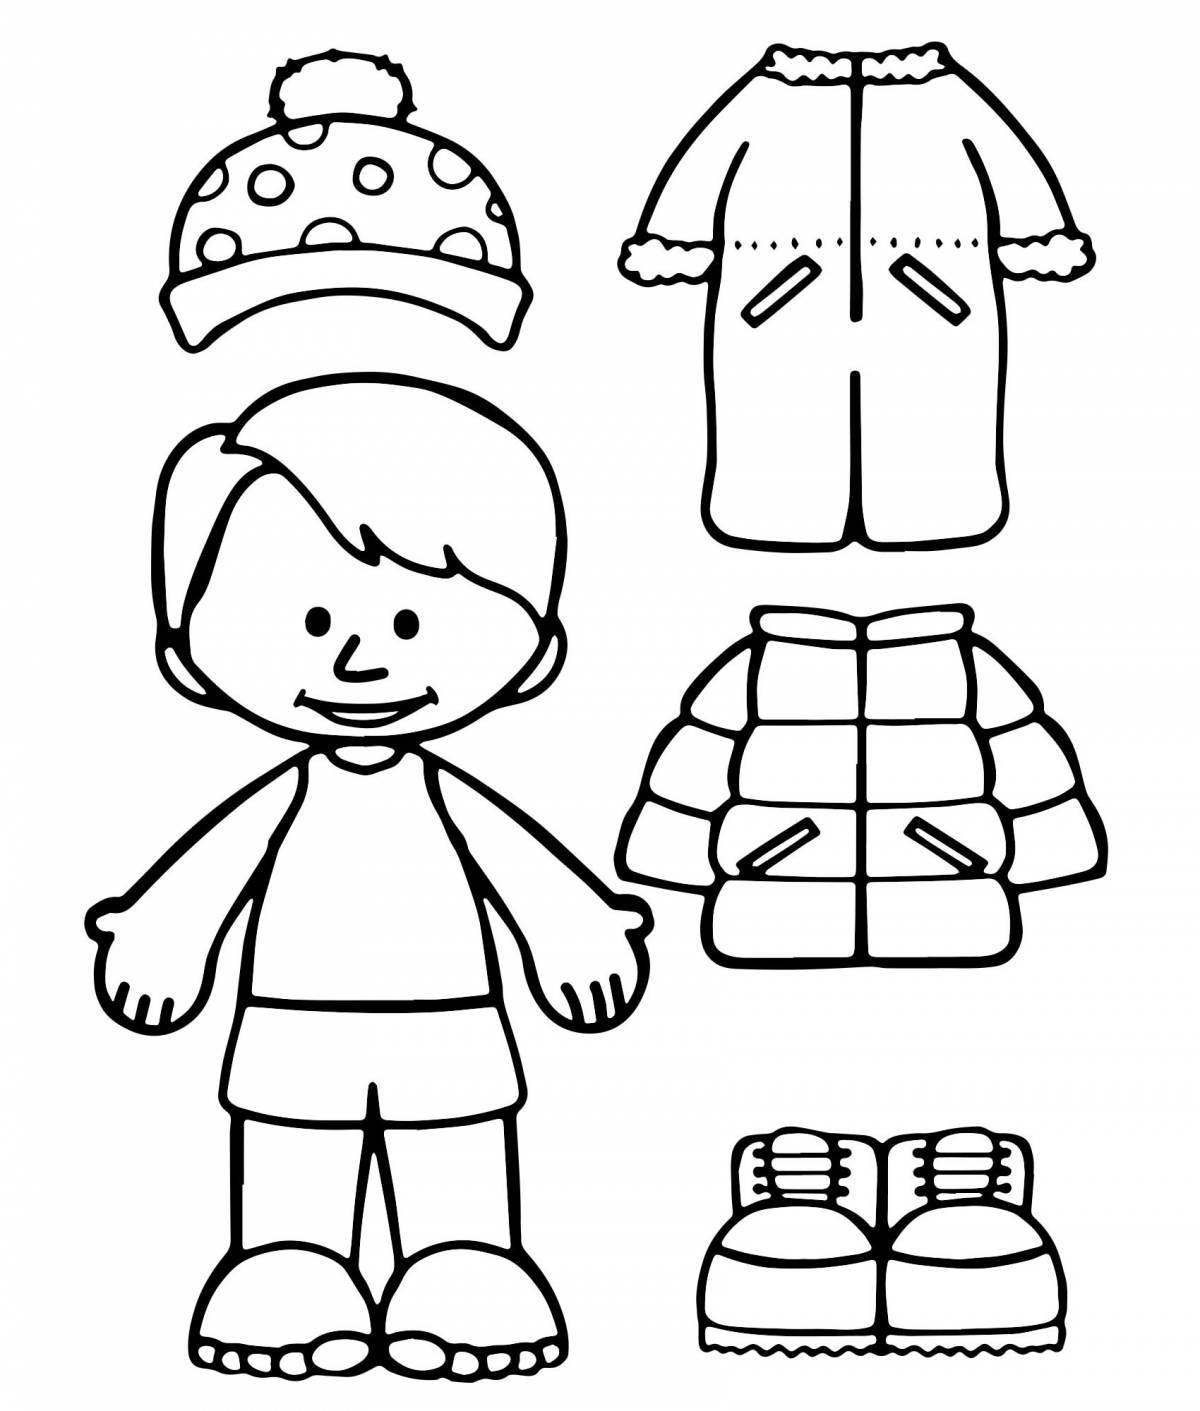 Luminous coloring book for children boy in winter clothes